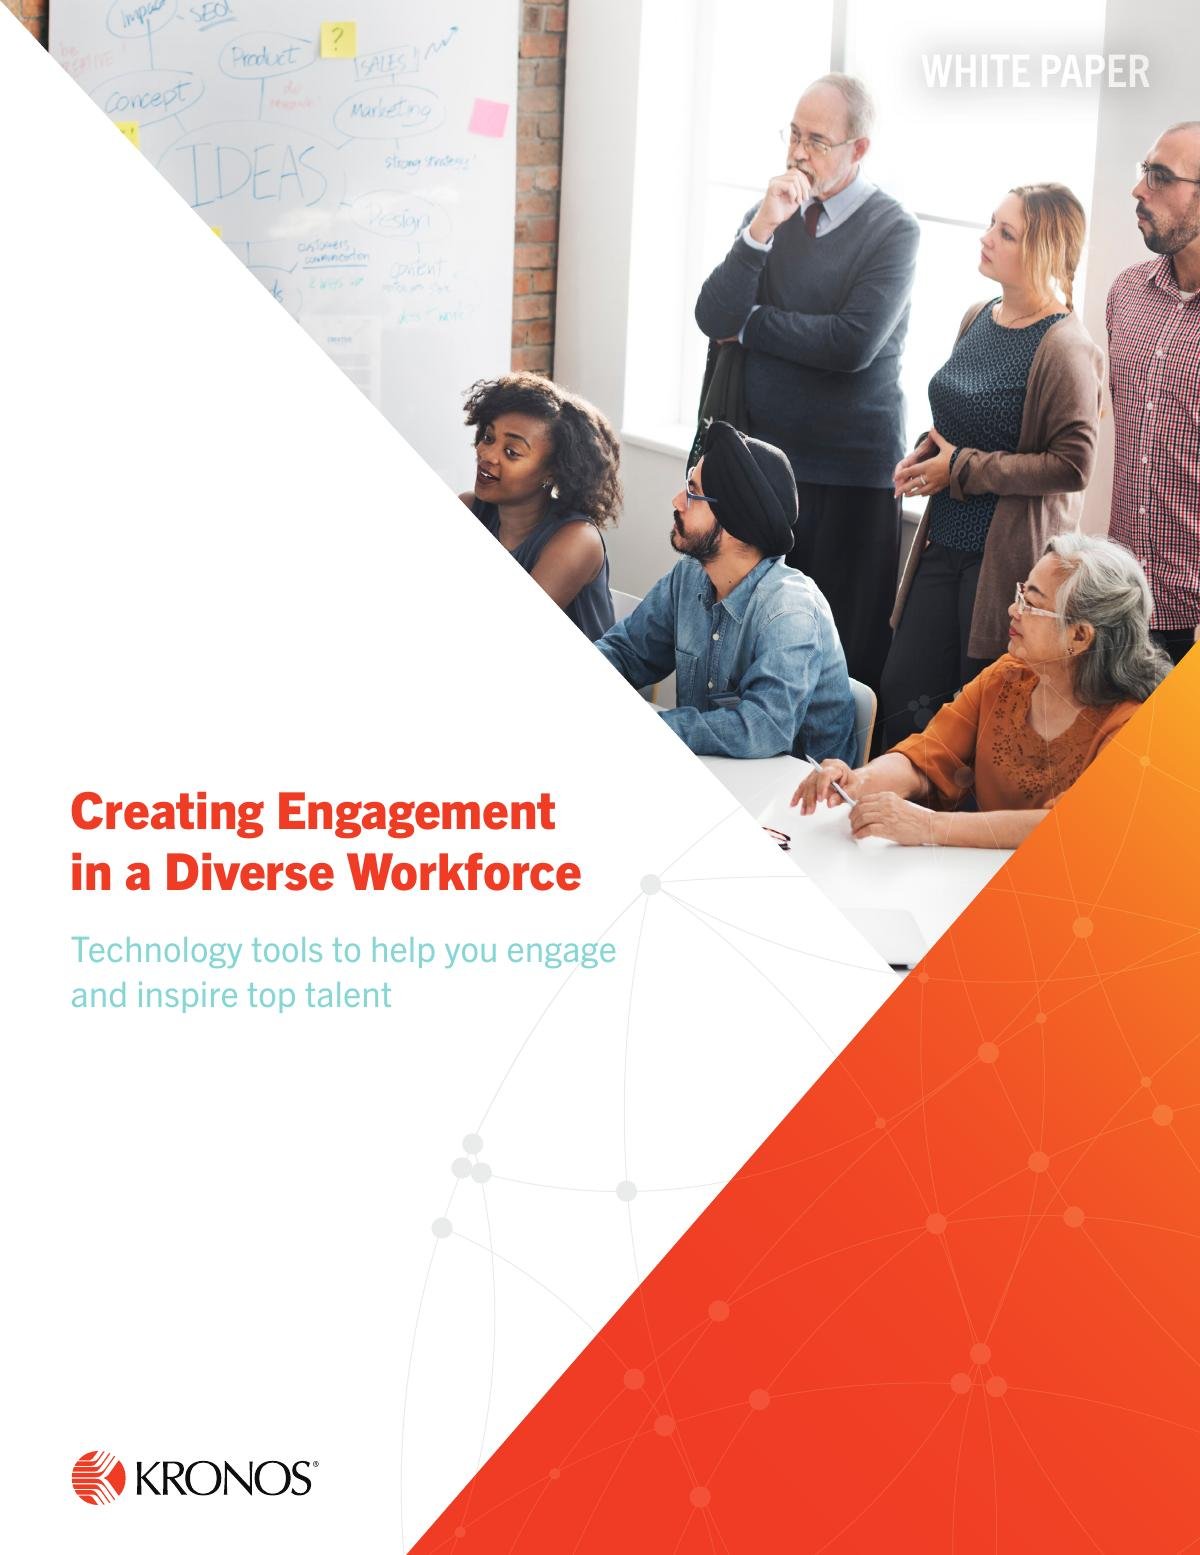 Creating Engagement in a Diverse Workforce